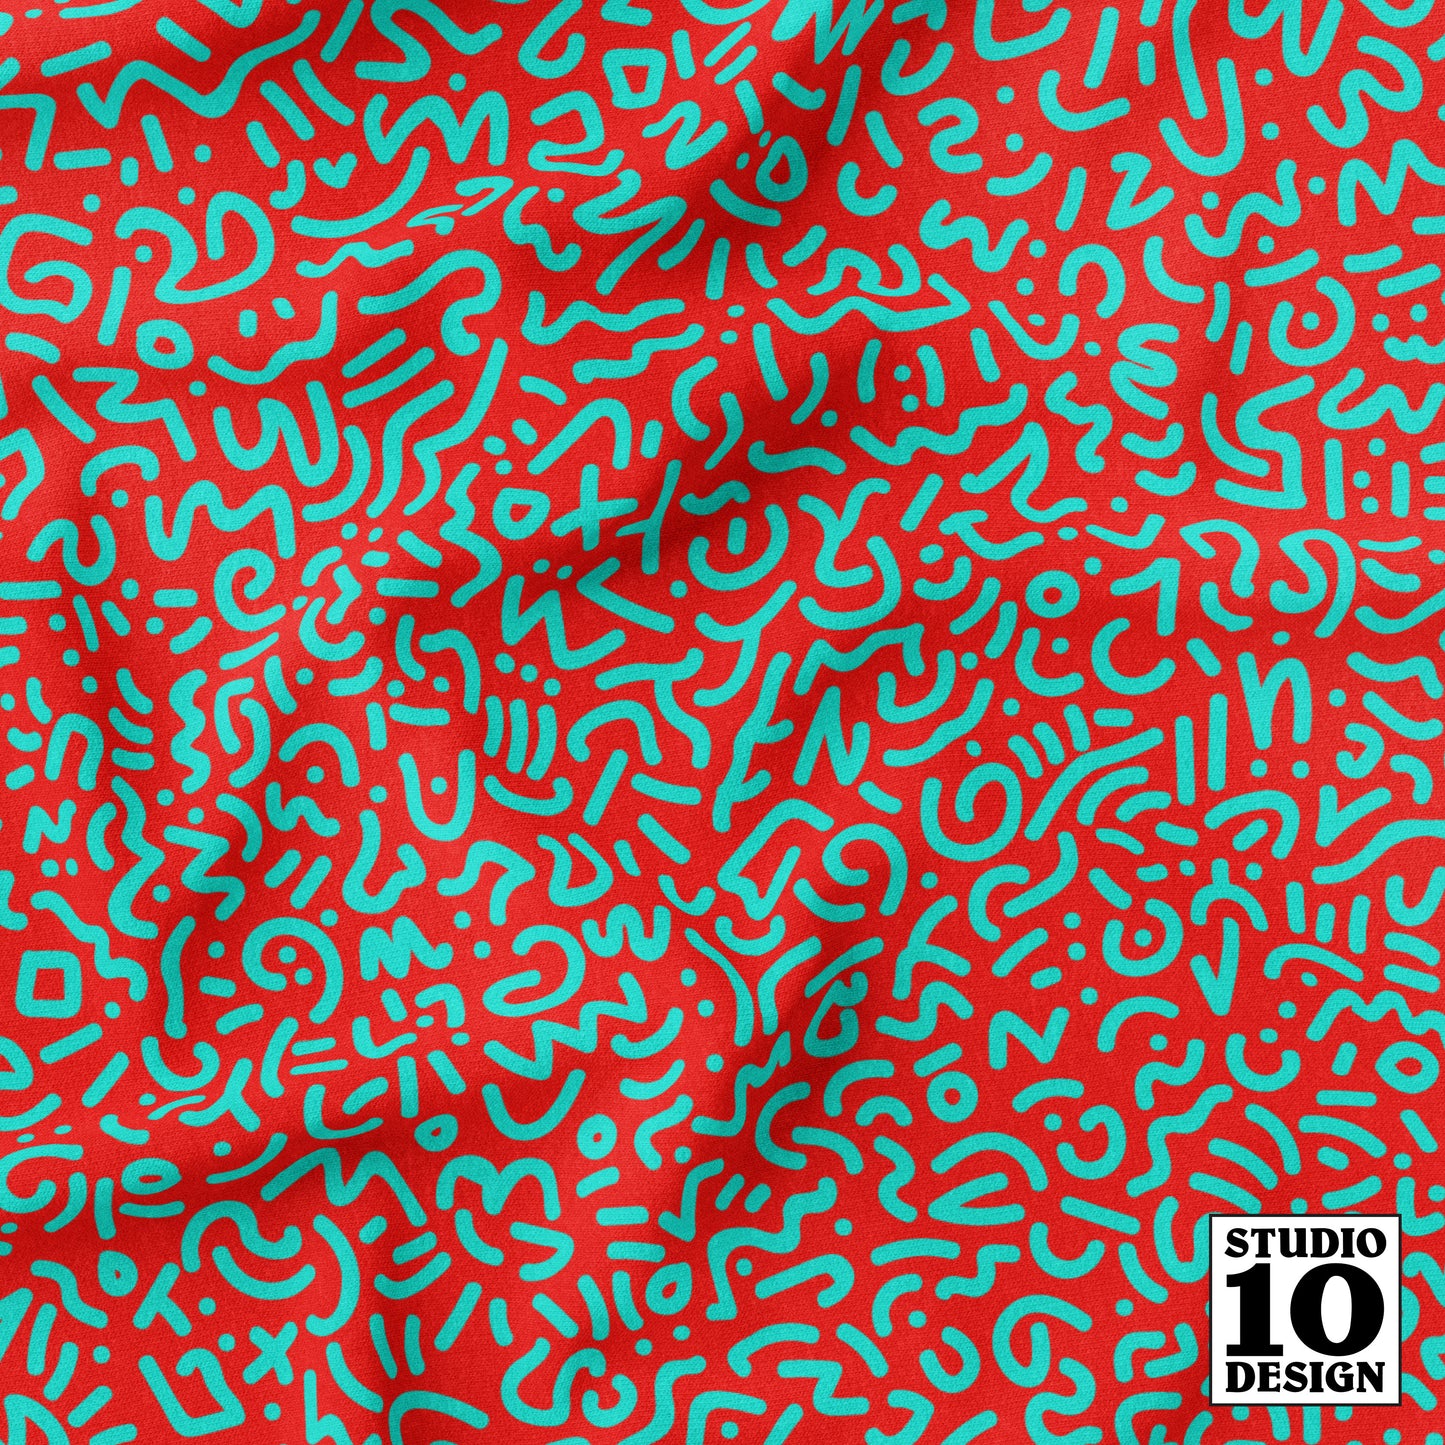 Doodle Teal+Red Printed Fabric by Studio Ten Design